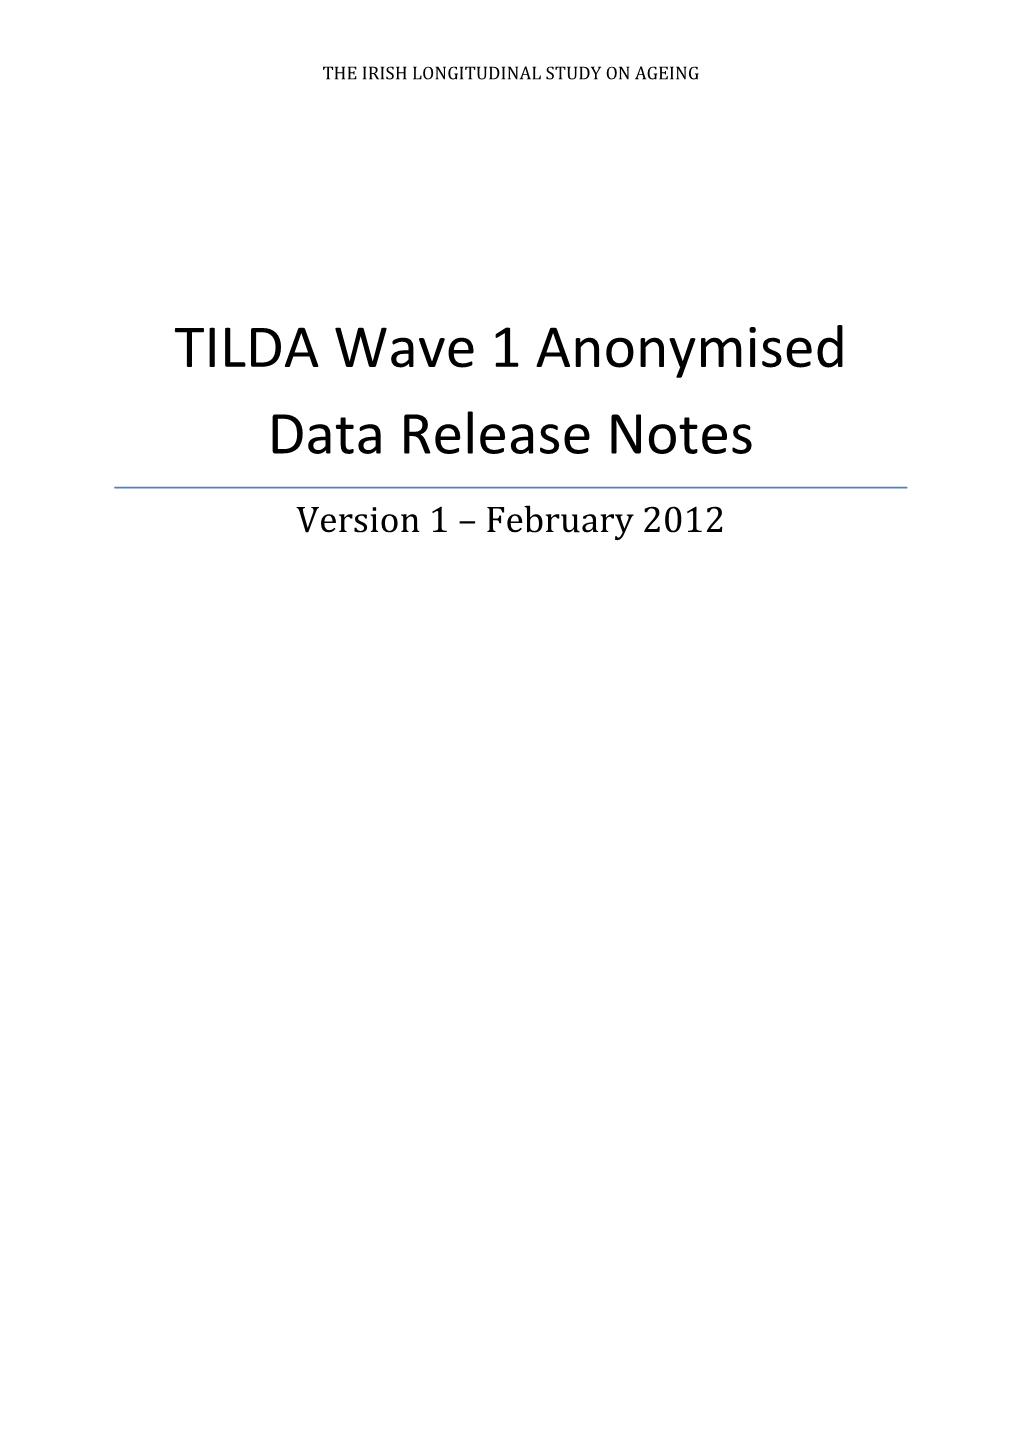 TILDA Wave 1 Anonymised Data Release Notes